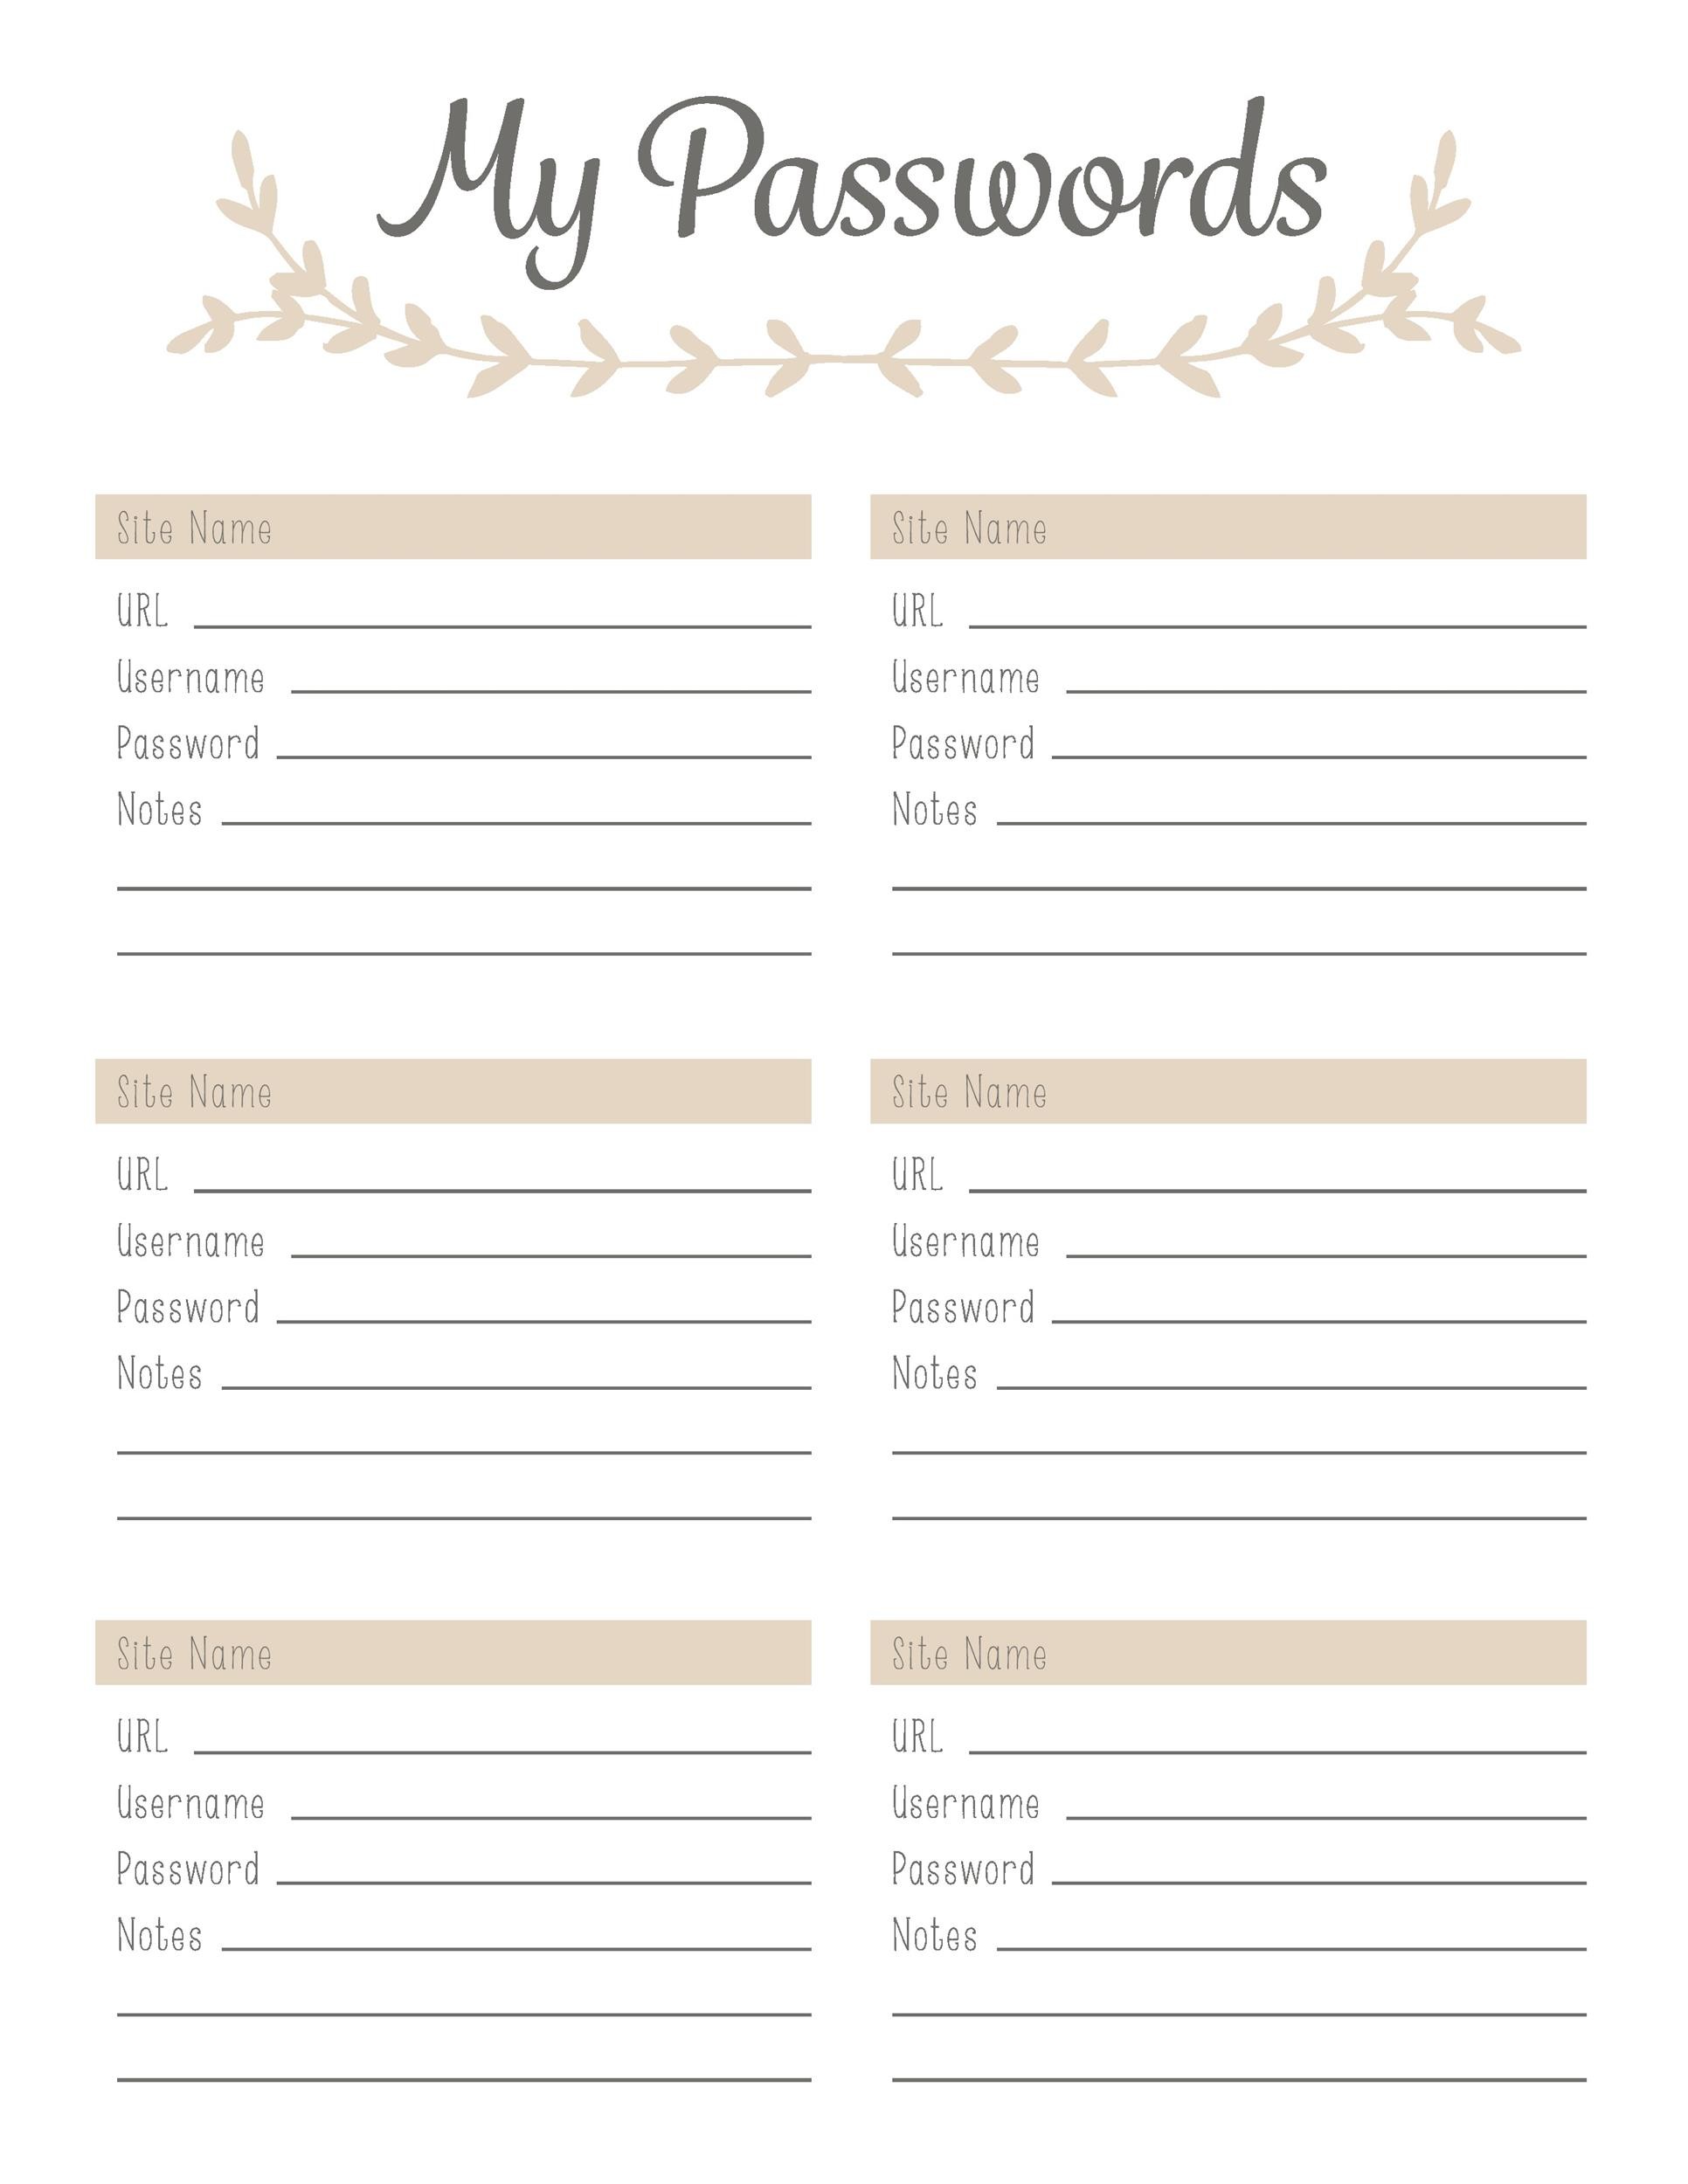 Free Printable Forms To Record Passwords And Website Journal ...